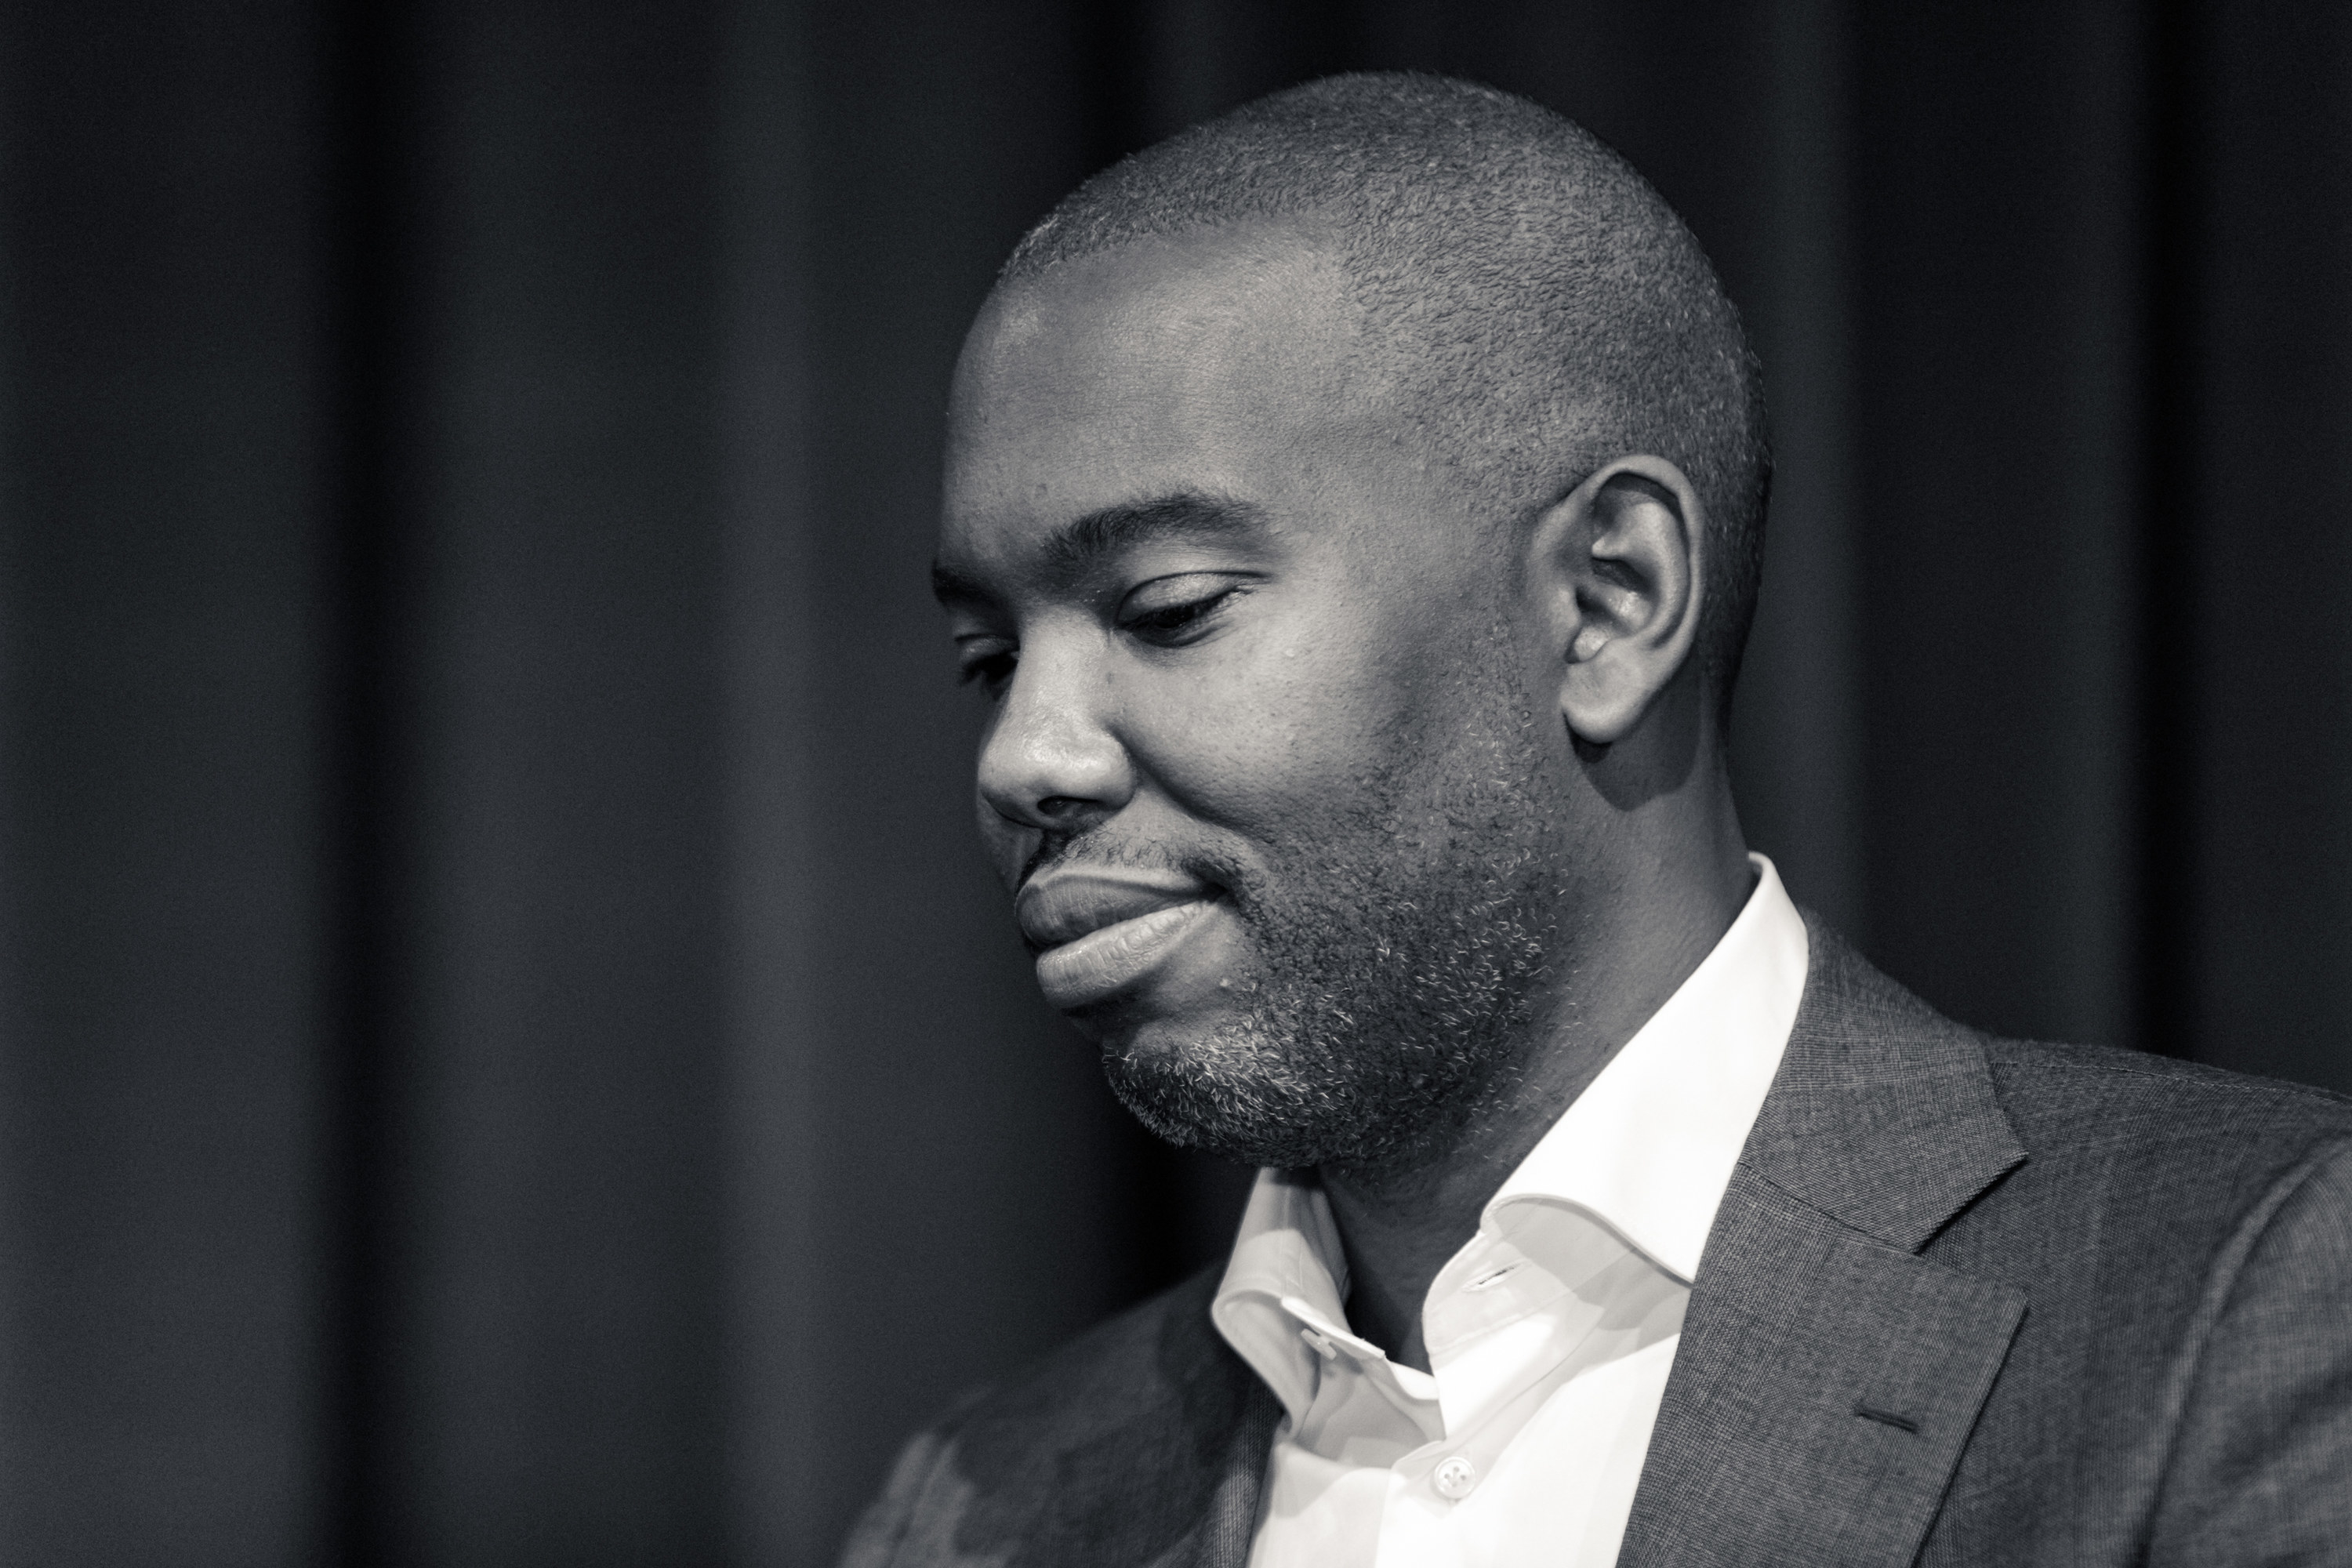 Ta-Nehisi Coates photographed in black and white